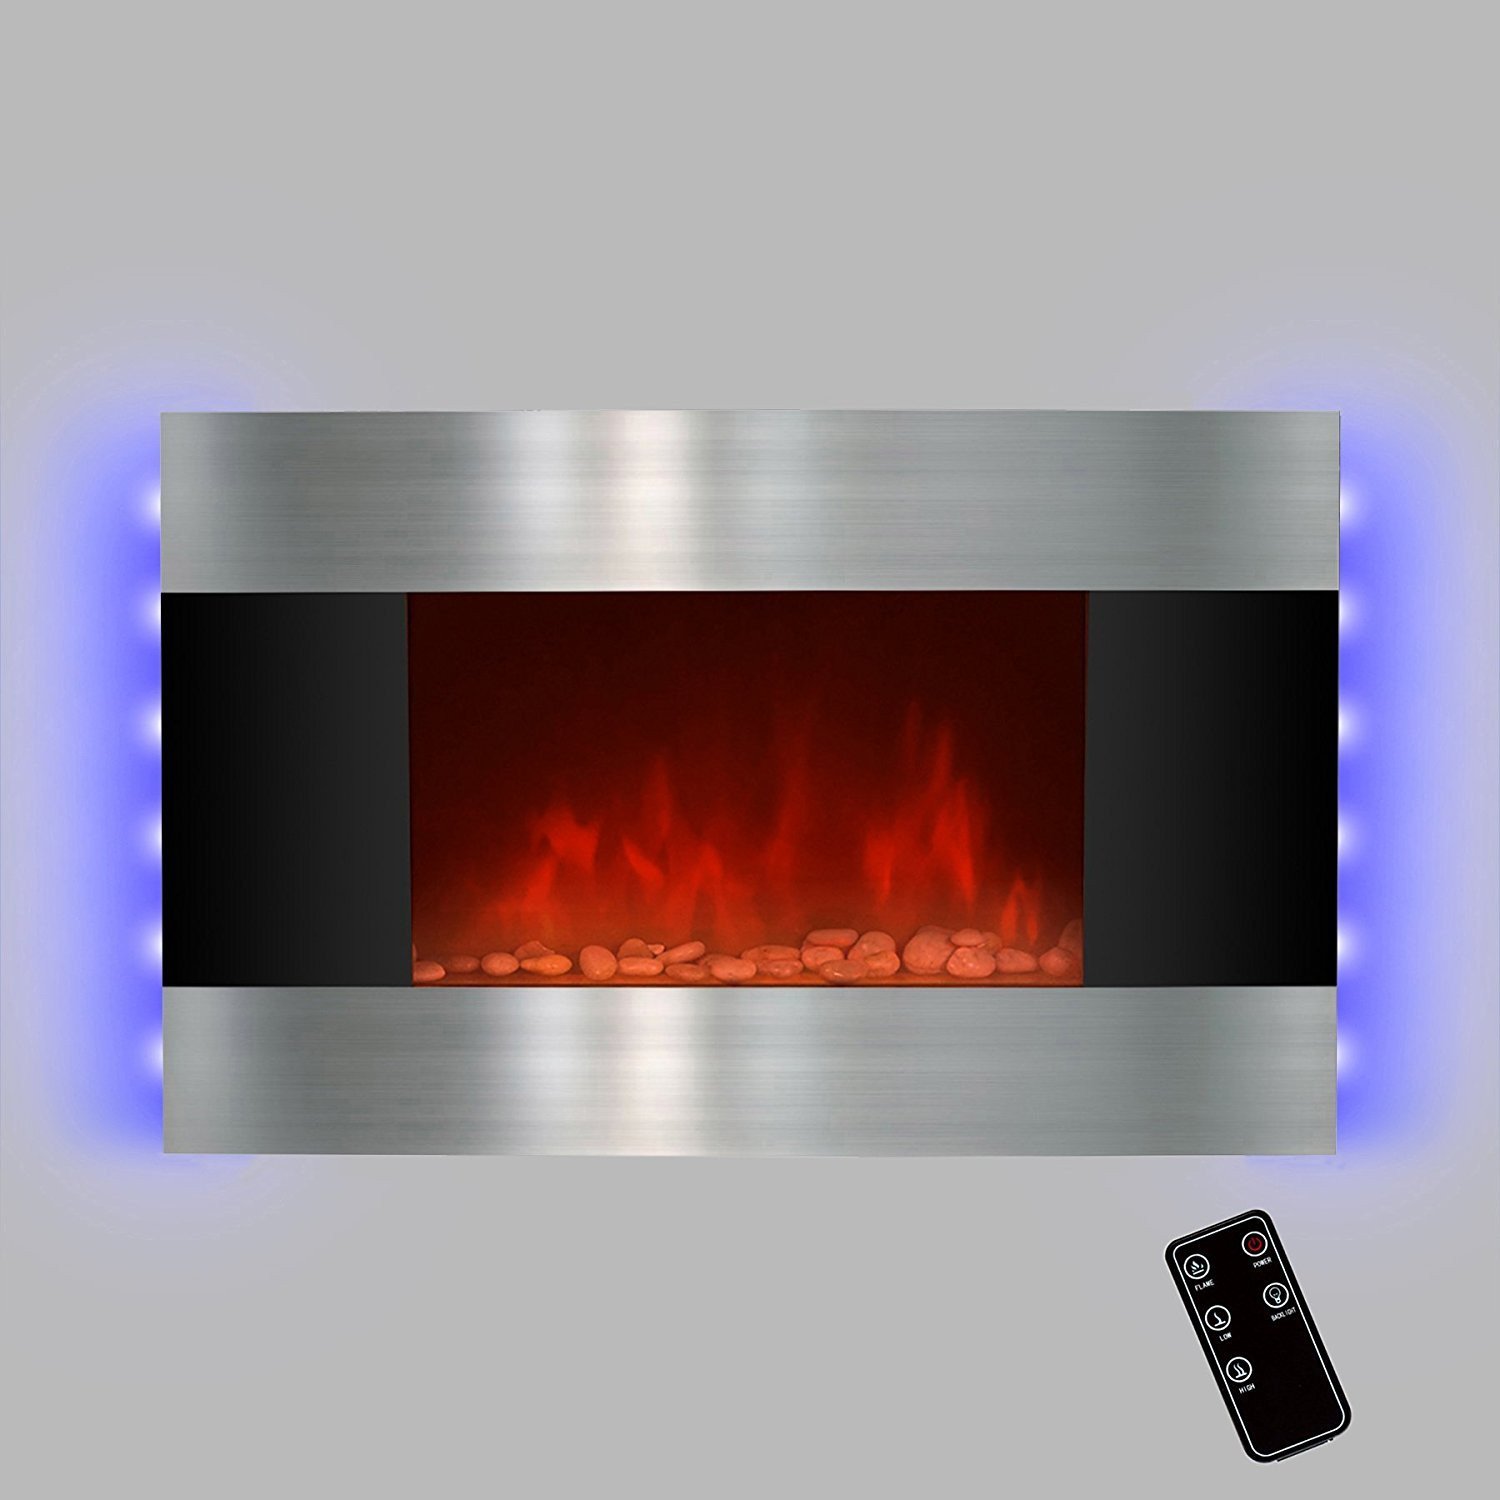 Magic Flame Electric Fireplace Beautiful Led Backlit 36" Stainless Steel Wall Mount Heater Fireplace